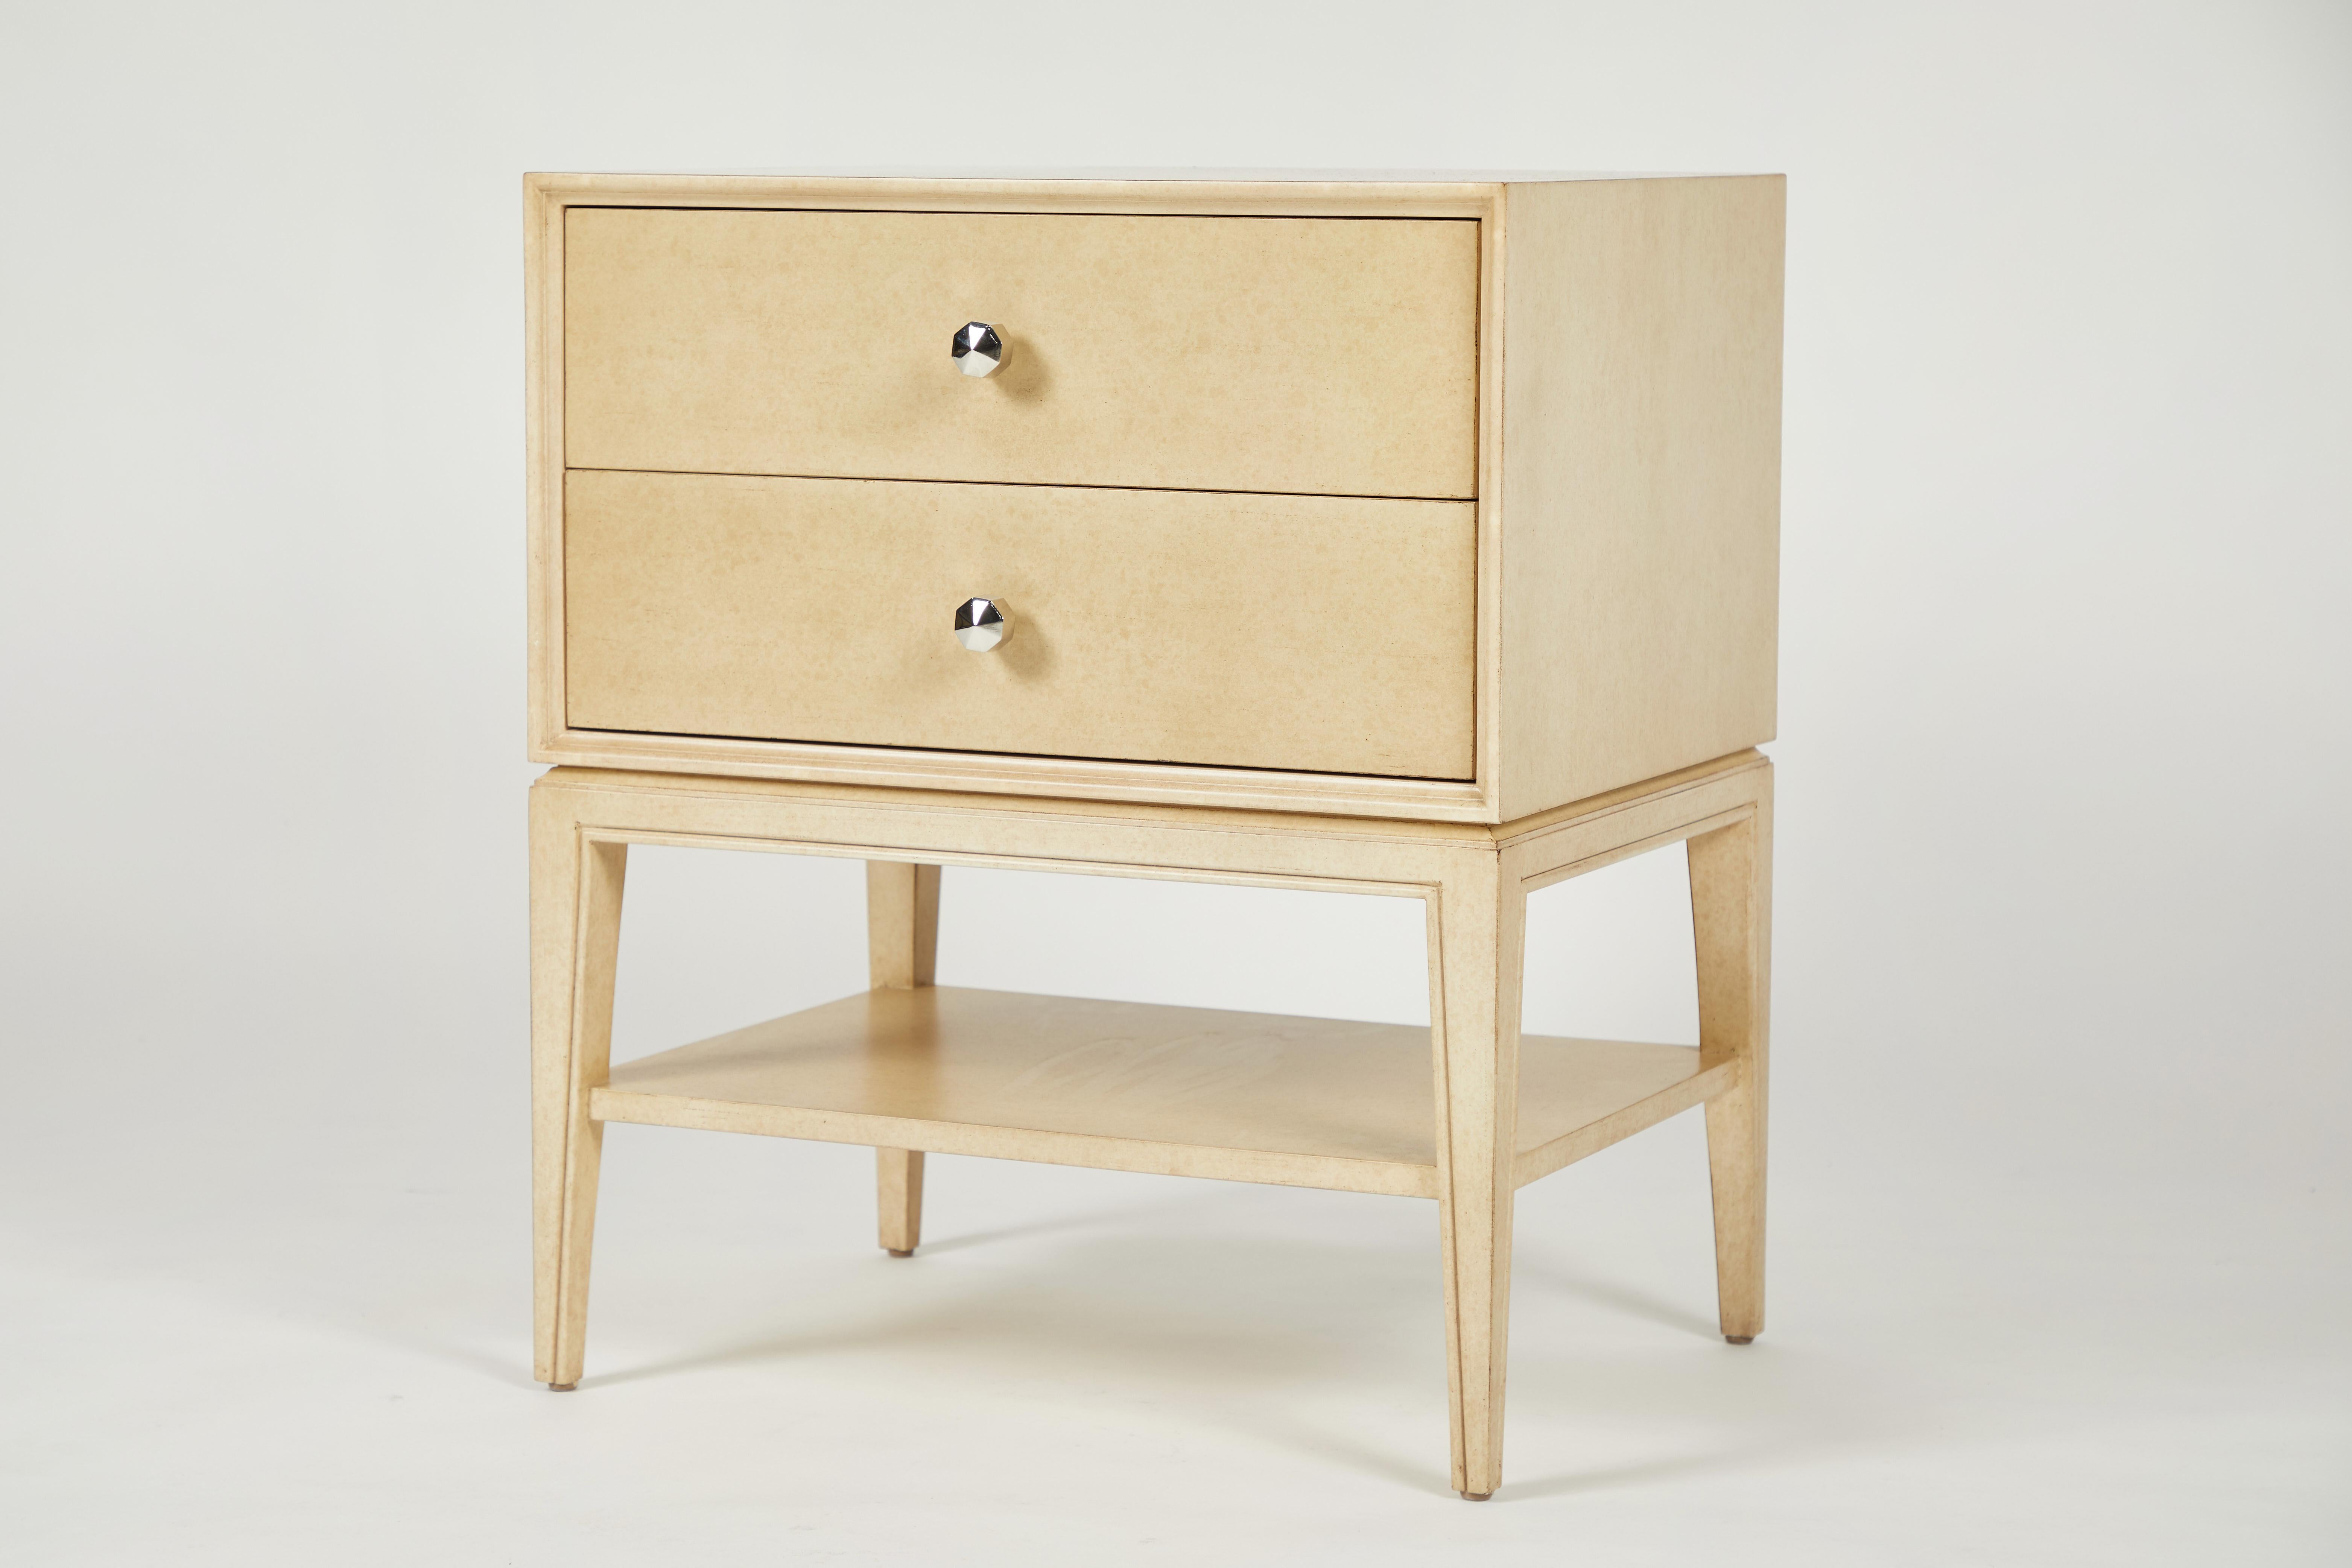 Stunning transitional custom made nightstand. It has two drawers and an open shelf below.
Versatile design and coloration suitable for many types of interior spaces.